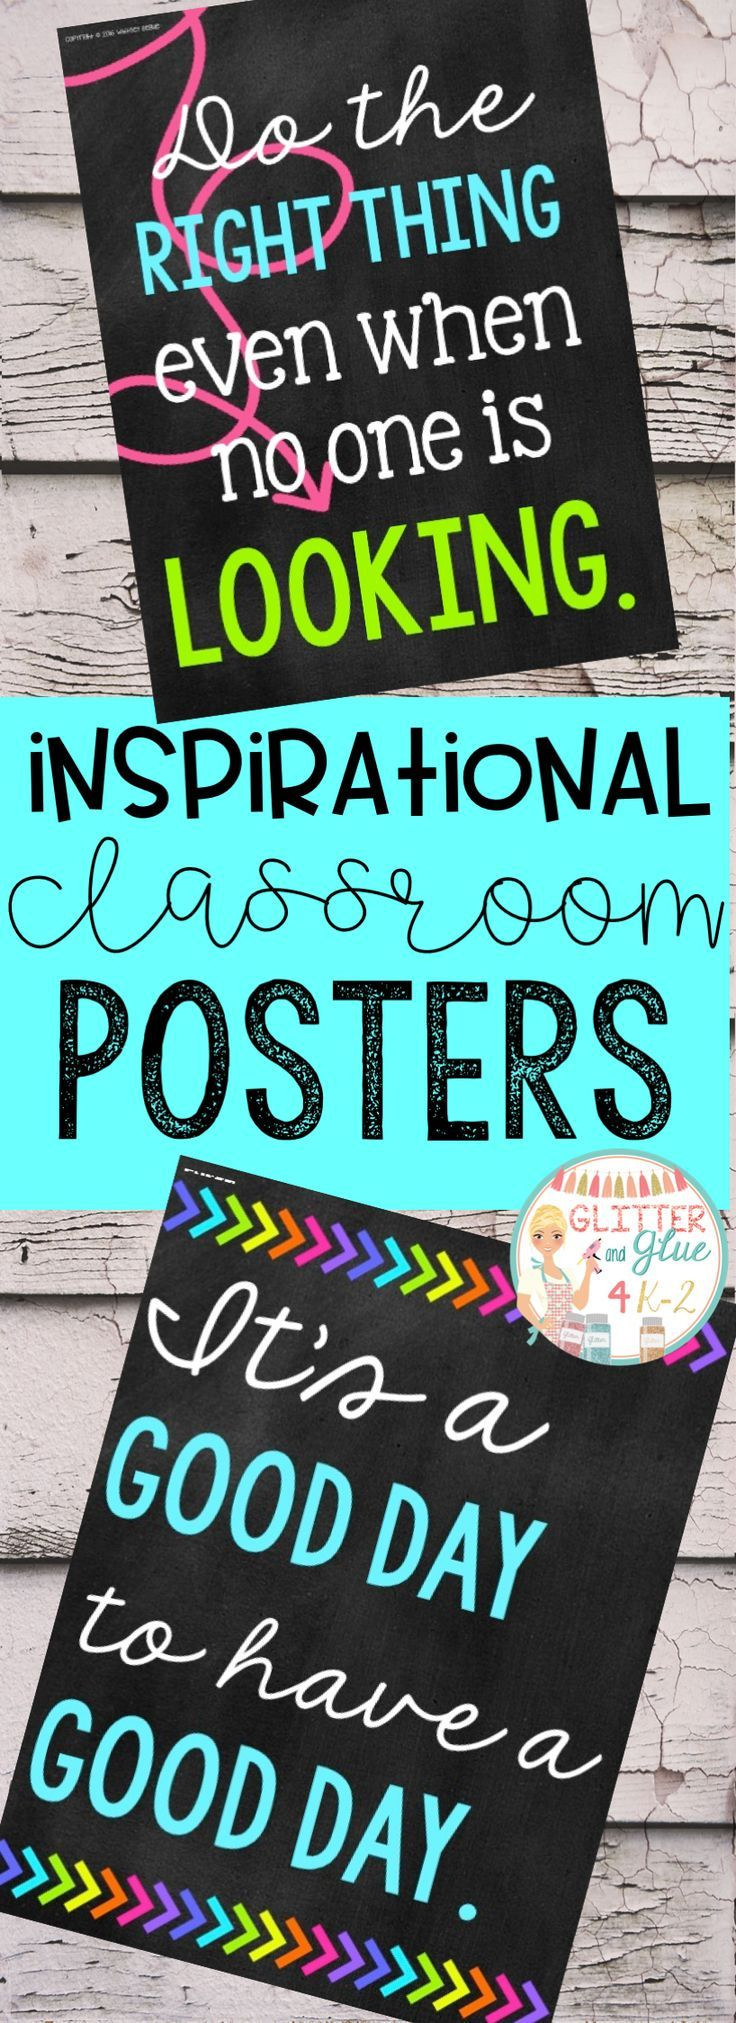 Inspirational Quotes For Classroom
 Best 25 Positive classroom quotes ideas on Pinterest